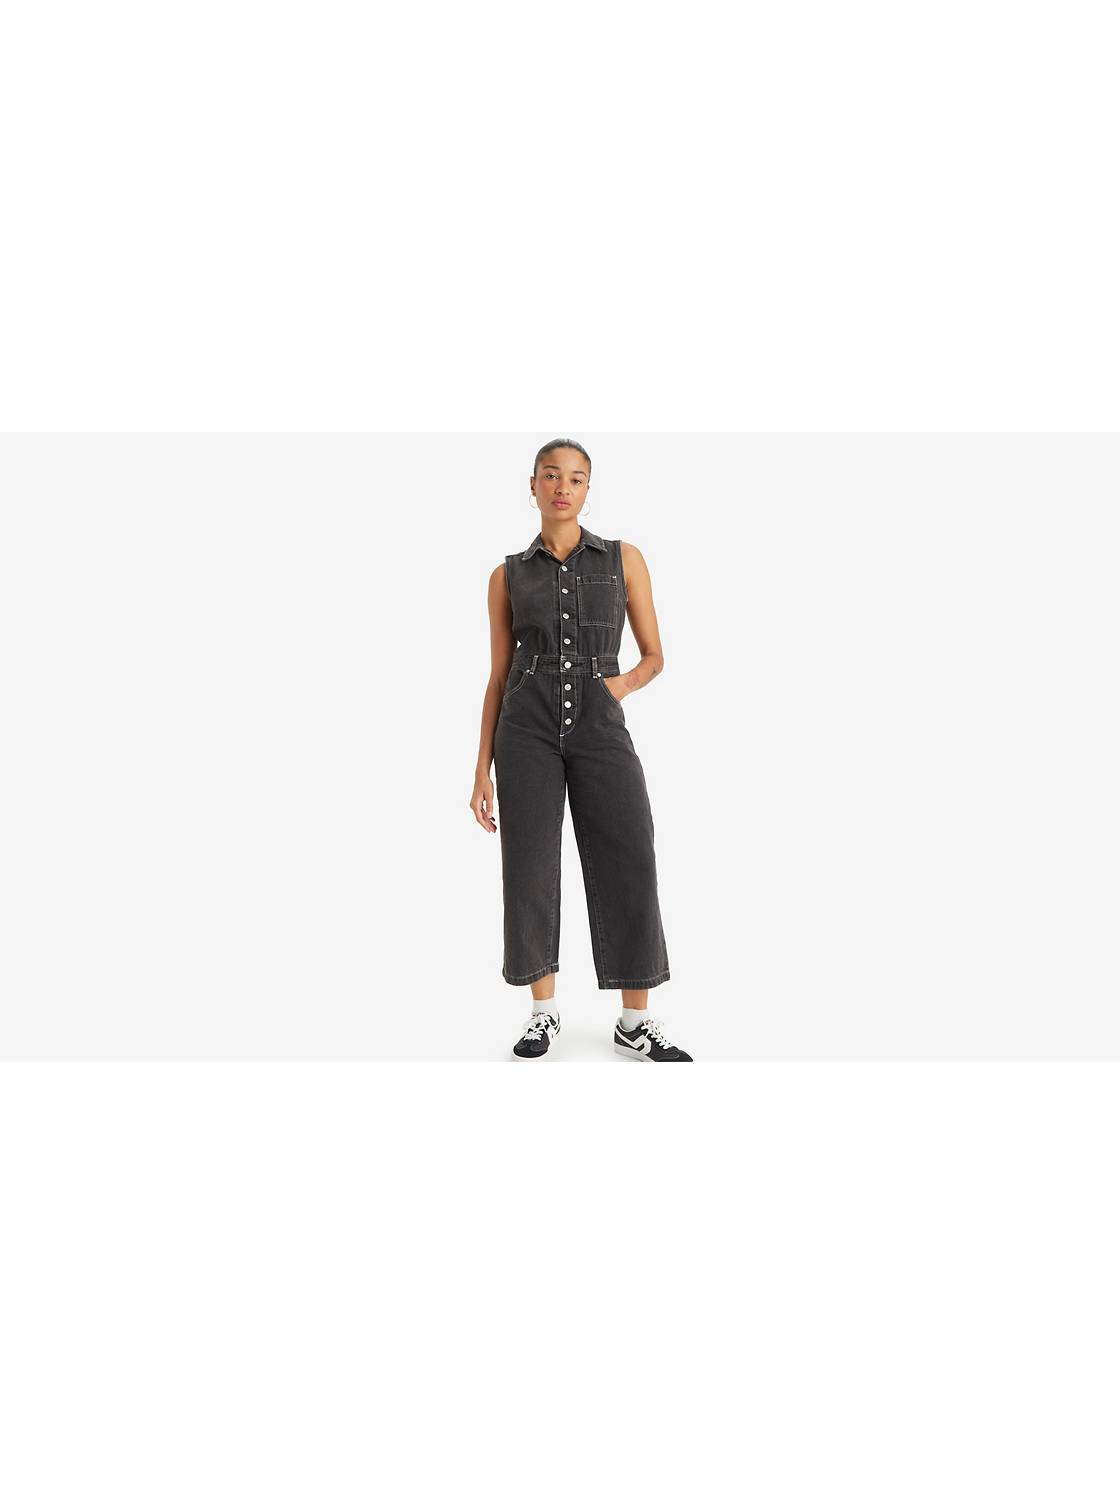 Overalls Women Sleeveless Metal Button Straps Jumpsuits Solid Wide